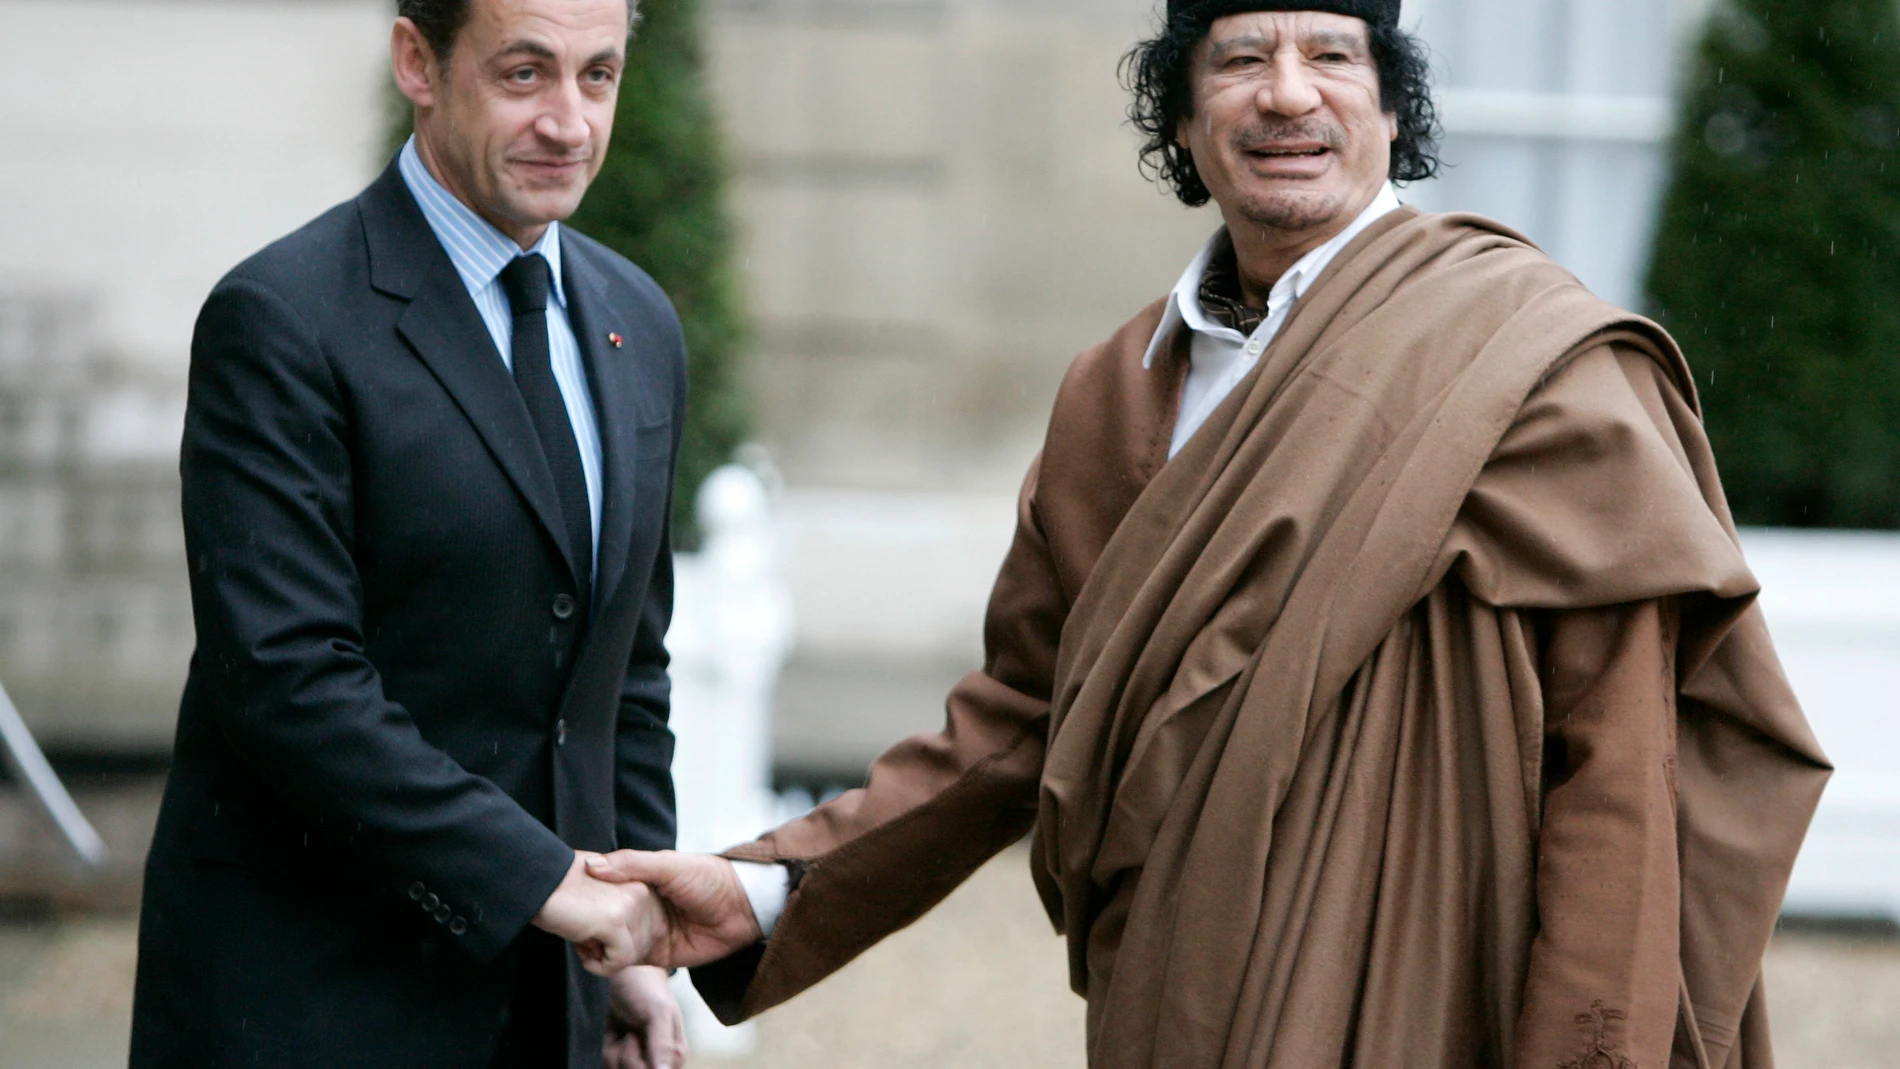 FILE - French President Nicolas Sarkozy, left, greets Libyan leader Col. Moammar Gadhafi upon his arrival at the Elysee Palace, in Paris Dec. 10, 2007. French investigative magistrates on Friday, Aug. 25, 2023, ordered former president Nicolas Sarkozy and 12 others to go on trial on charges that his 2007 presidential campaign received millions in illegal financing from the government of late Libyan leader Moammar Gadhafi. (AP Photo/Francois Mori, File)